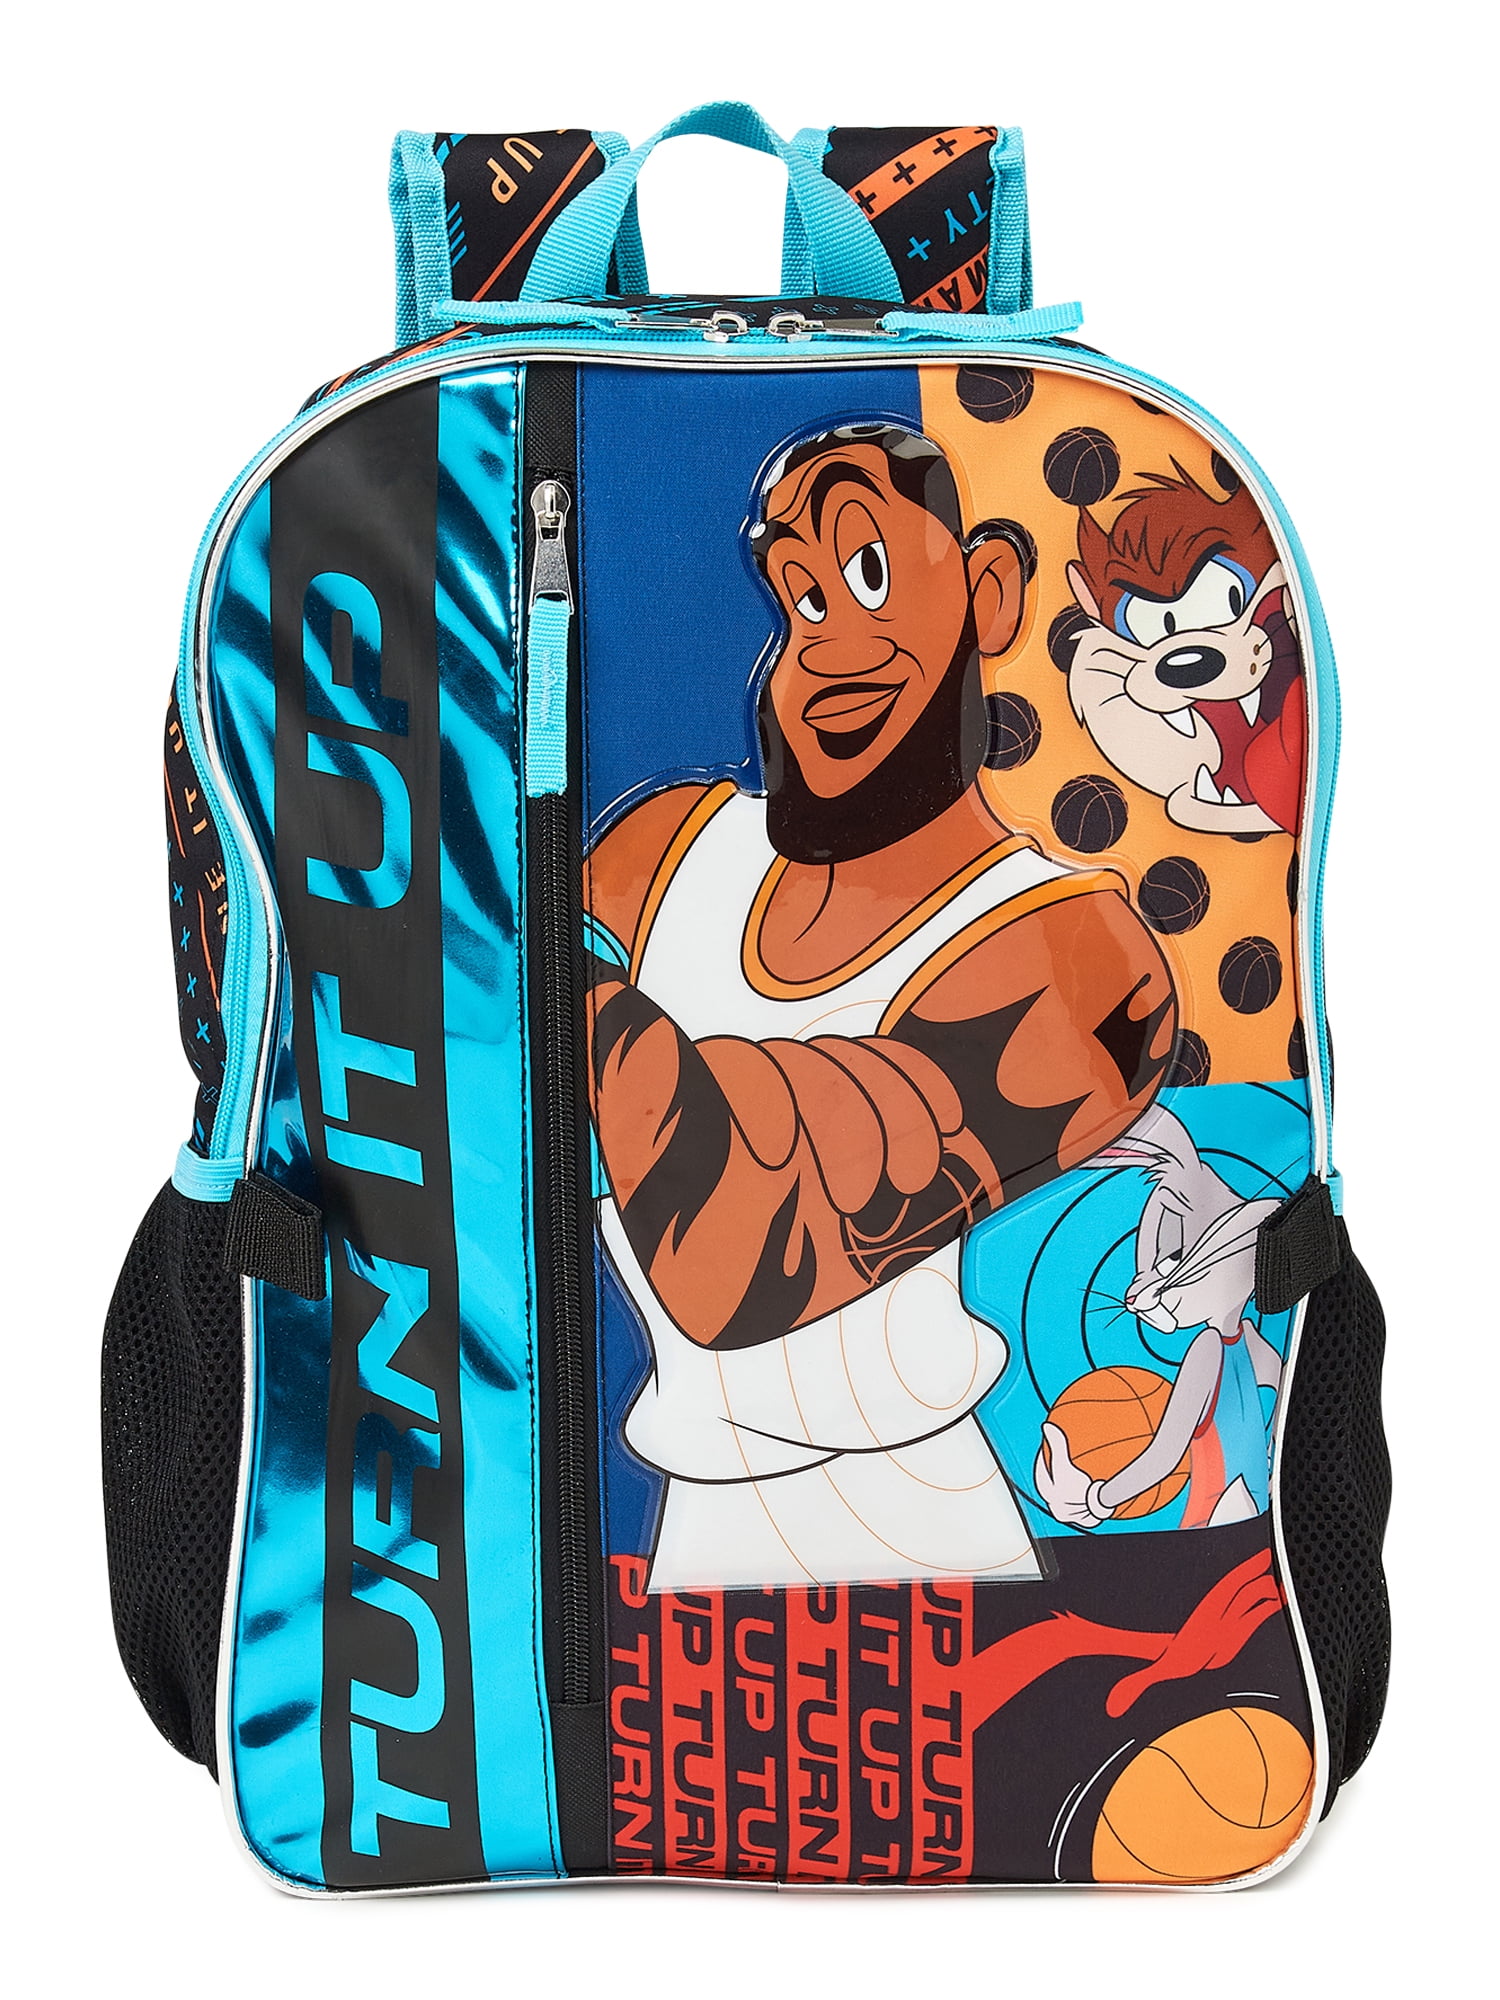 Warner Bros Space Jam 2: A New Legacy Divide and Conquer Backpack with Lunchbox 2-Piece Set